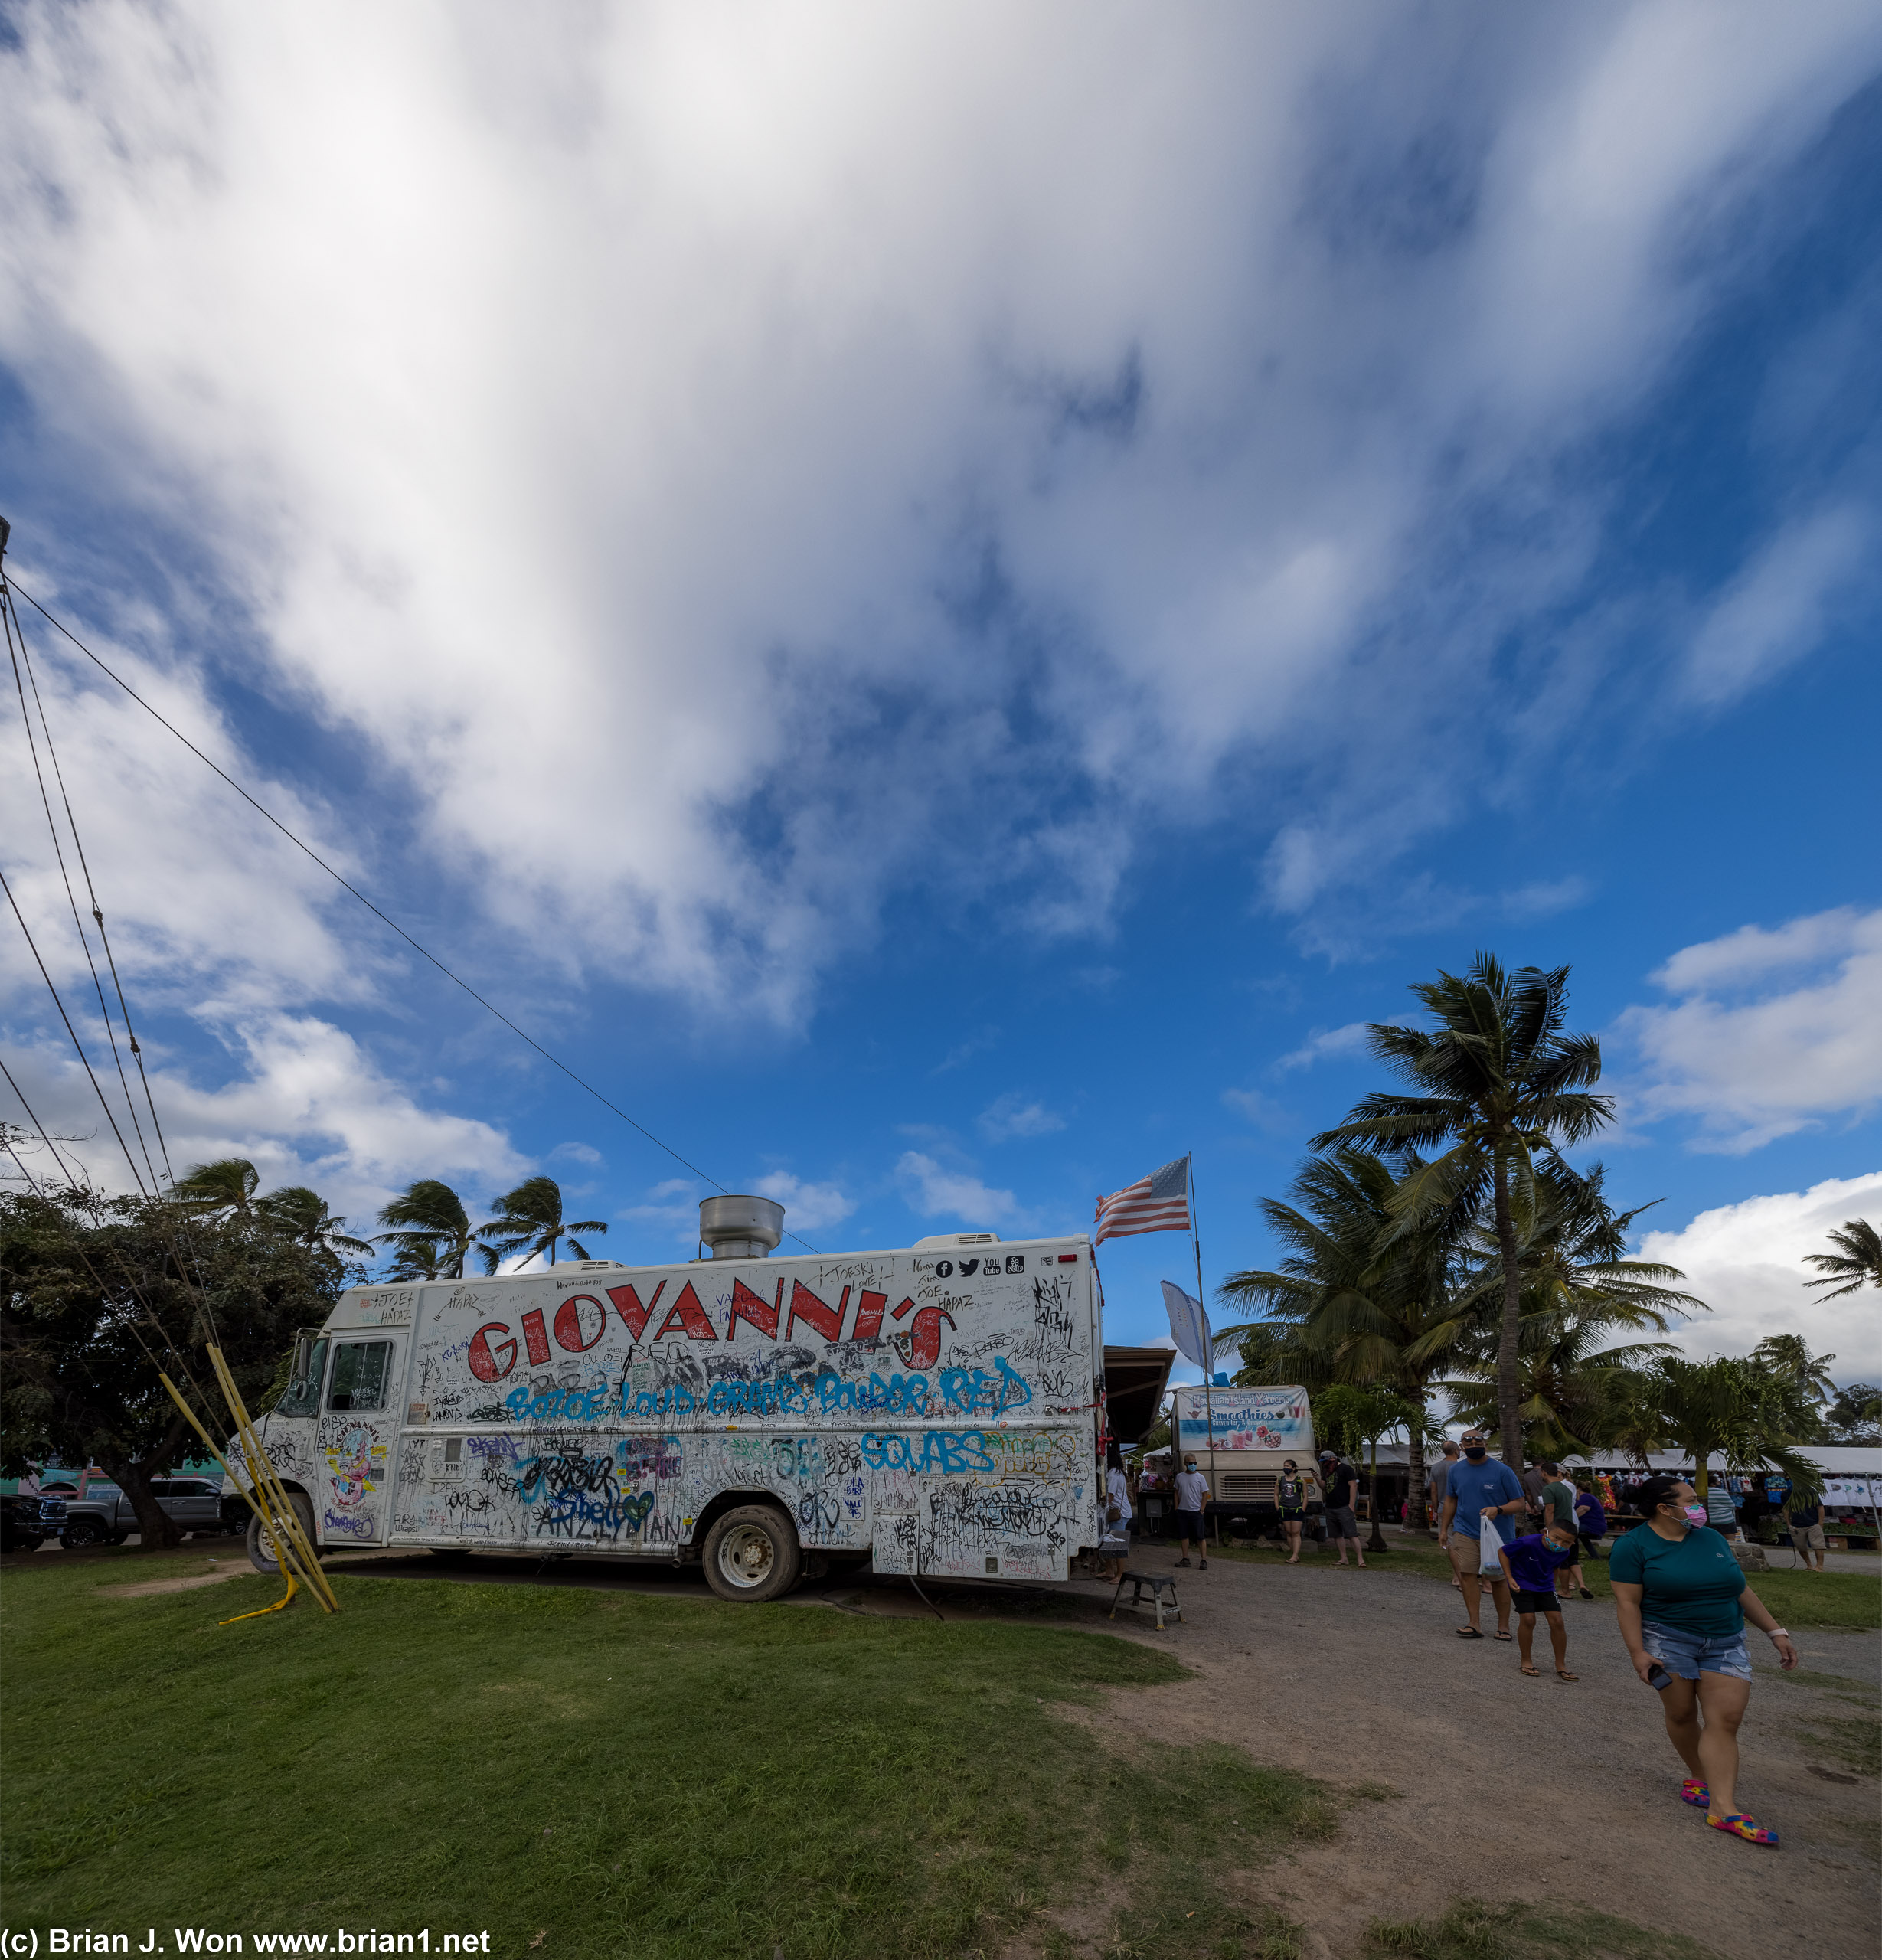 Over an hour up the road, some of the Kahuku shrimp trucks.